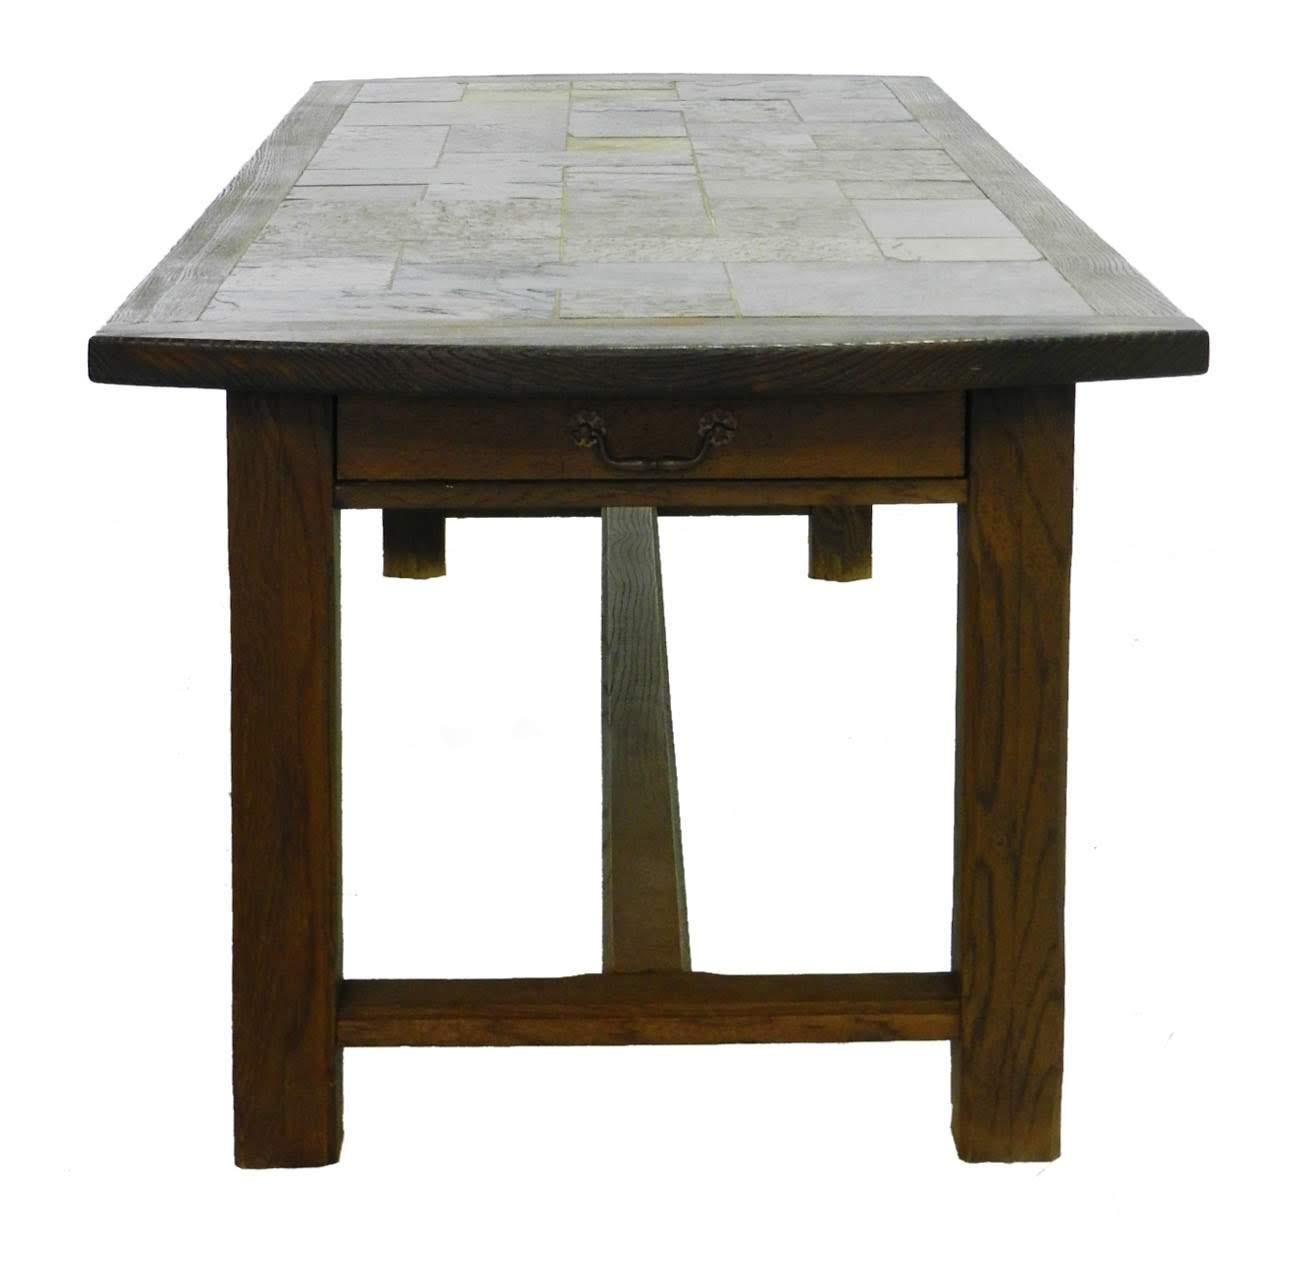 French farm table inset stone tiles vintage 20th century Shaker style one of a kind
Single drawer one end
Unusual Artisan made table with French Ardoise stone tiled top of varying hues
Dismantles for shipping and placing in situ
Solid chestnut wood